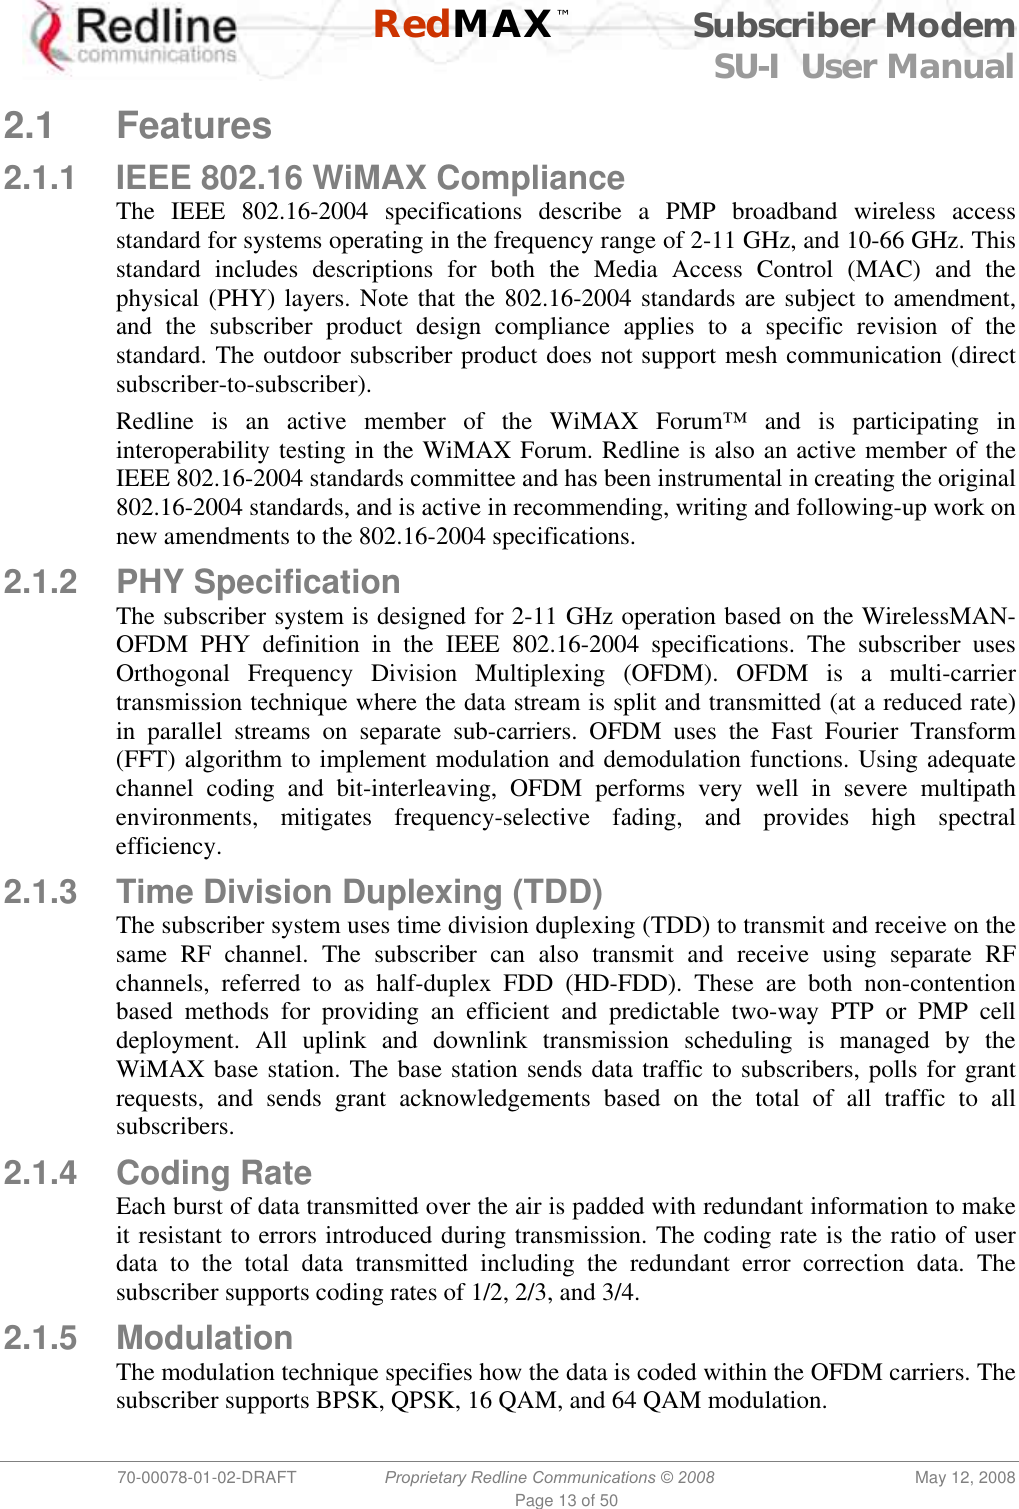    RedMAX™ Subscriber Modem SU-I  User Manual  70-00078-01-02-DRAFT  Proprietary Redline Communications © 2008  May 12, 2008 Page 13 of 50  2.1 Features 2.1.1  IEEE 802.16 WiMAX Compliance The IEEE 802.16-2004 specifications describe a PMP broadband wireless access standard for systems operating in the frequency range of 2-11 GHz, and 10-66 GHz. This standard includes descriptions for both the Media Access Control (MAC) and the physical (PHY) layers. Note that the 802.16-2004 standards are subject to amendment, and the subscriber product design compliance applies to a specific revision of the standard. The outdoor subscriber product does not support mesh communication (direct subscriber-to-subscriber). Redline is an active member of the WiMAX Forum™ and is participating in interoperability testing in the WiMAX Forum. Redline is also an active member of the IEEE 802.16-2004 standards committee and has been instrumental in creating the original 802.16-2004 standards, and is active in recommending, writing and following-up work on new amendments to the 802.16-2004 specifications.  2.1.2 PHY Specification The subscriber system is designed for 2-11 GHz operation based on the WirelessMAN-OFDM PHY definition in the IEEE 802.16-2004 specifications. The subscriber uses Orthogonal Frequency Division Multiplexing (OFDM). OFDM is a multi-carrier transmission technique where the data stream is split and transmitted (at a reduced rate) in parallel streams on separate sub-carriers. OFDM uses the Fast Fourier Transform (FFT) algorithm to implement modulation and demodulation functions. Using adequate channel coding and bit-interleaving, OFDM performs very well in severe multipath environments, mitigates frequency-selective fading, and provides high spectral efficiency. 2.1.3  Time Division Duplexing (TDD) The subscriber system uses time division duplexing (TDD) to transmit and receive on the same RF channel. The subscriber can also transmit and receive using separate RF channels, referred to as half-duplex FDD (HD-FDD). These are both non-contention based methods for providing an efficient and predictable two-way PTP or PMP cell deployment. All uplink and downlink transmission scheduling is managed by the WiMAX base station. The base station sends data traffic to subscribers, polls for grant requests, and sends grant acknowledgements based on the total of all traffic to all subscribers. 2.1.4 Coding Rate Each burst of data transmitted over the air is padded with redundant information to make it resistant to errors introduced during transmission. The coding rate is the ratio of user data to the total data transmitted including the redundant error correction data. The subscriber supports coding rates of 1/2, 2/3, and 3/4. 2.1.5 Modulation The modulation technique specifies how the data is coded within the OFDM carriers. The subscriber supports BPSK, QPSK, 16 QAM, and 64 QAM modulation. 